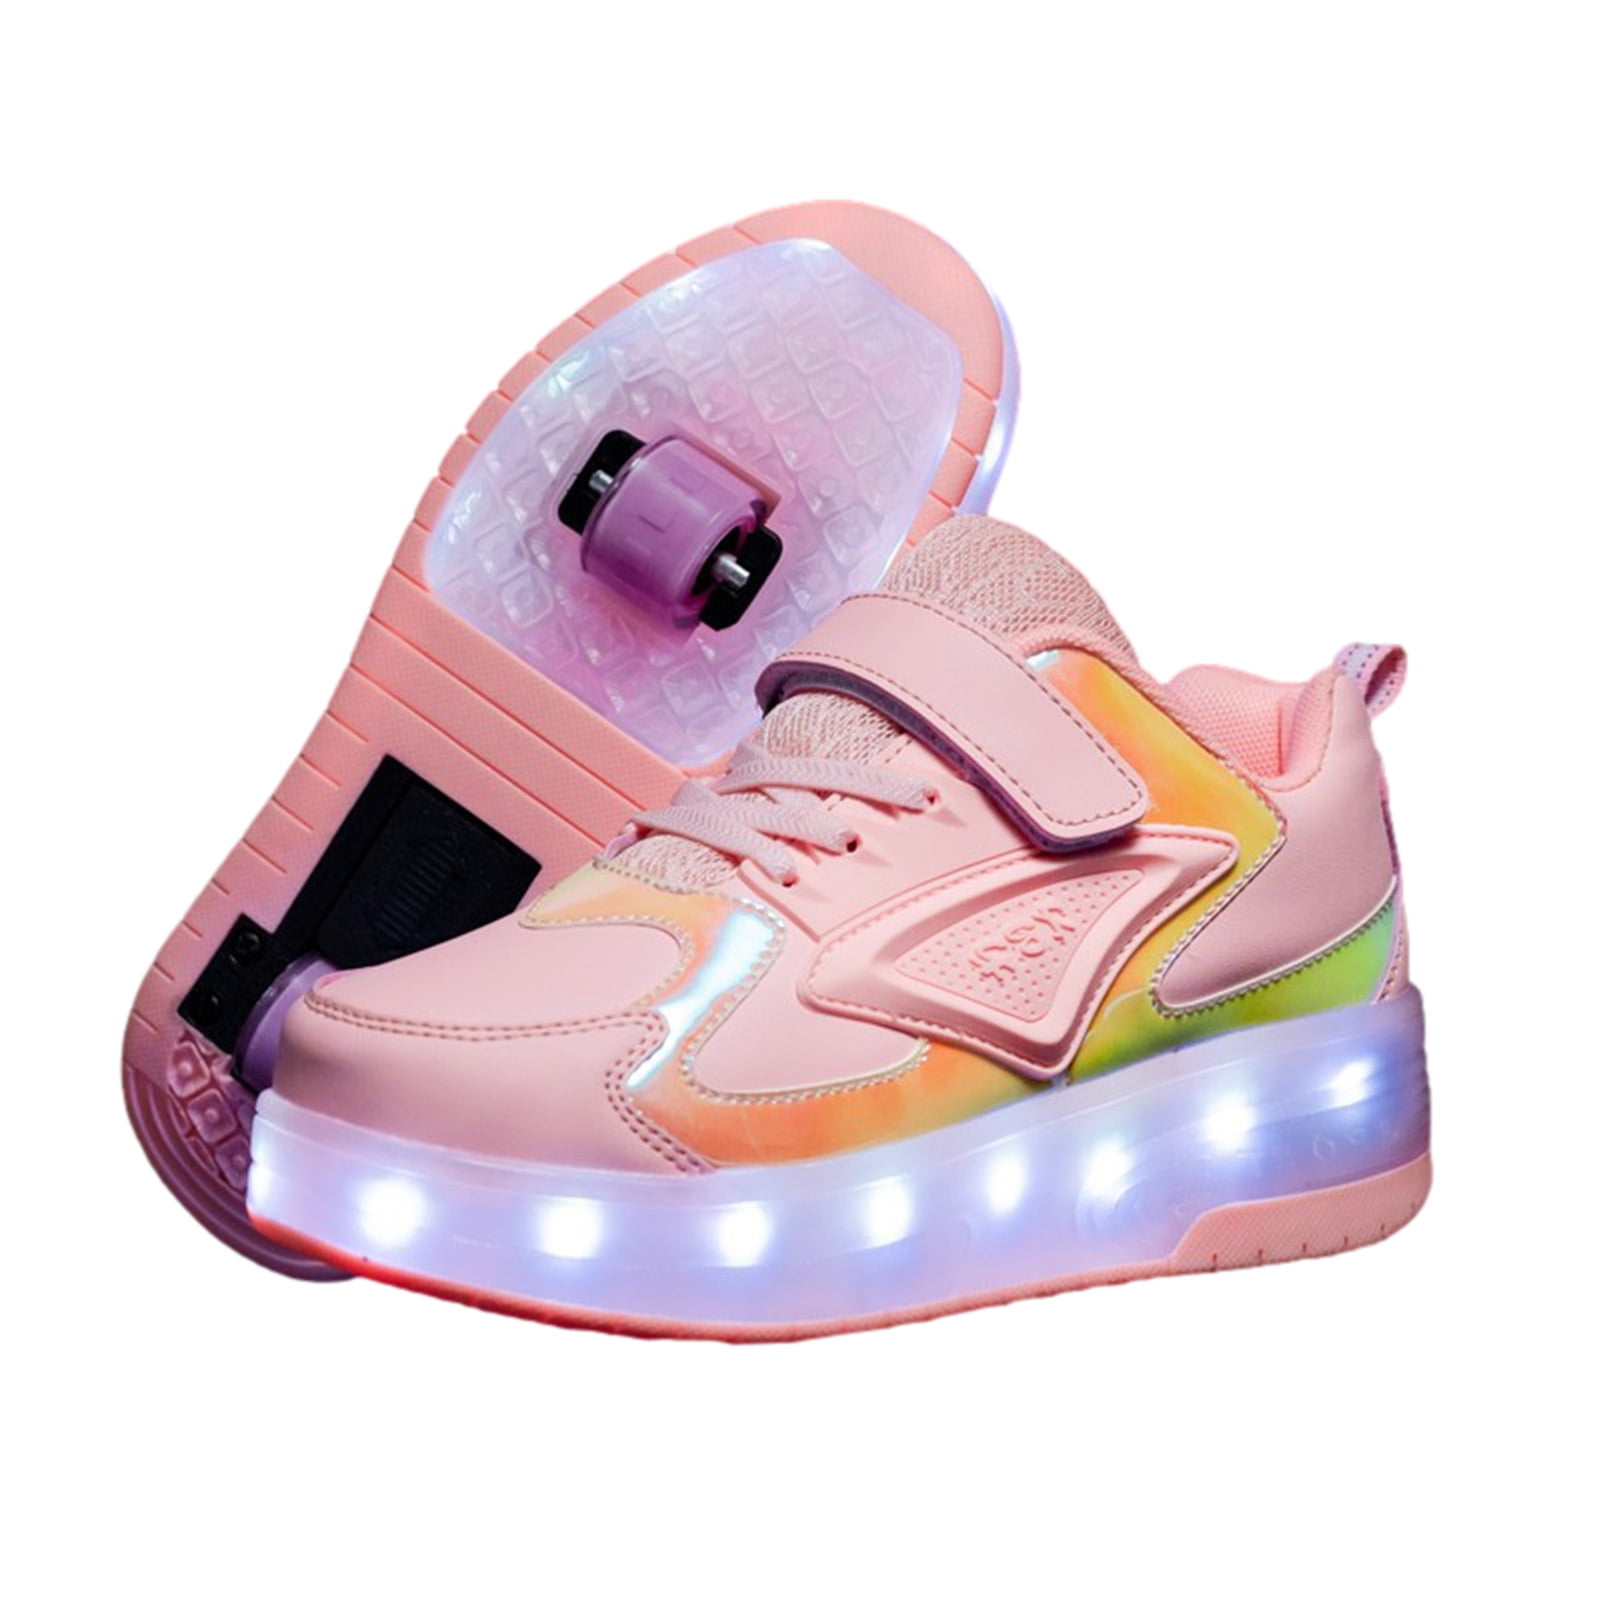 Kids Boys Girls LED Roller Skate Shoes Double Wheels Sneakers LED Flashing Luminous Skates Outdoor Fashion Athletic Trainers Technical Skateboarding Shoe with USB Charging 